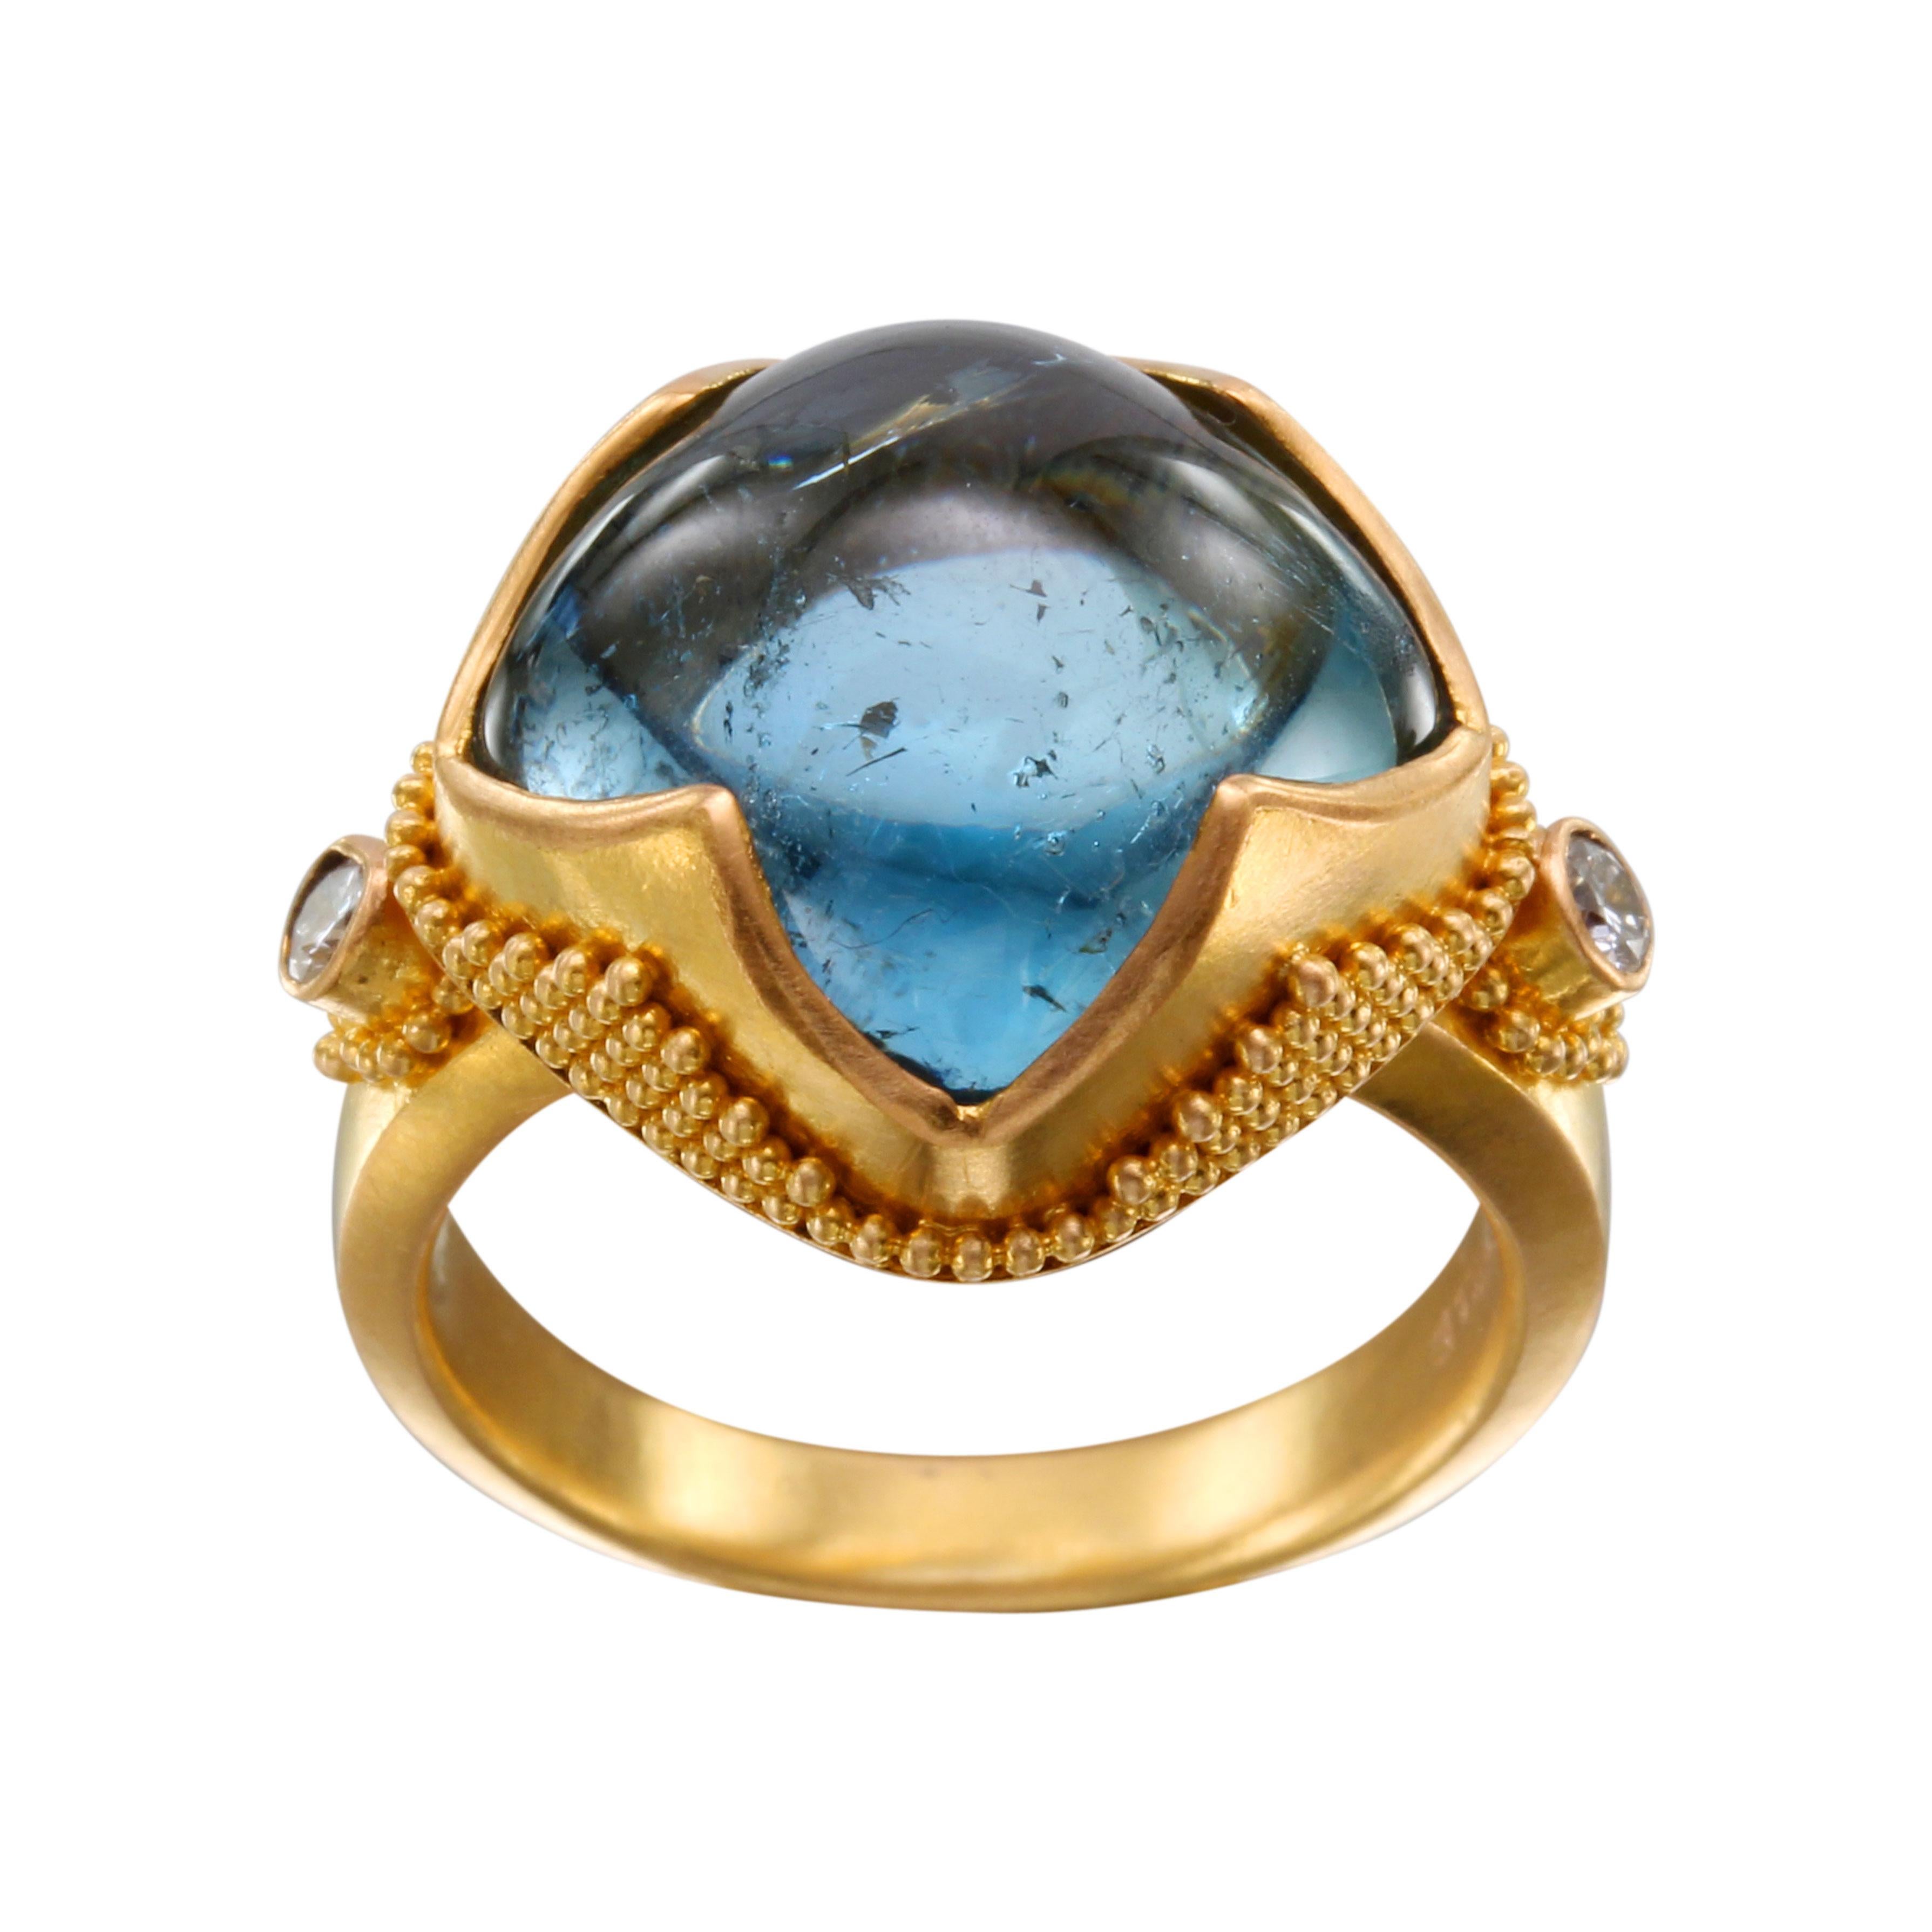 Steven Battelle 11.3 Carats Cabochon Aquamarine Diamonds 22K Gold Ring  In New Condition For Sale In Soquel, CA